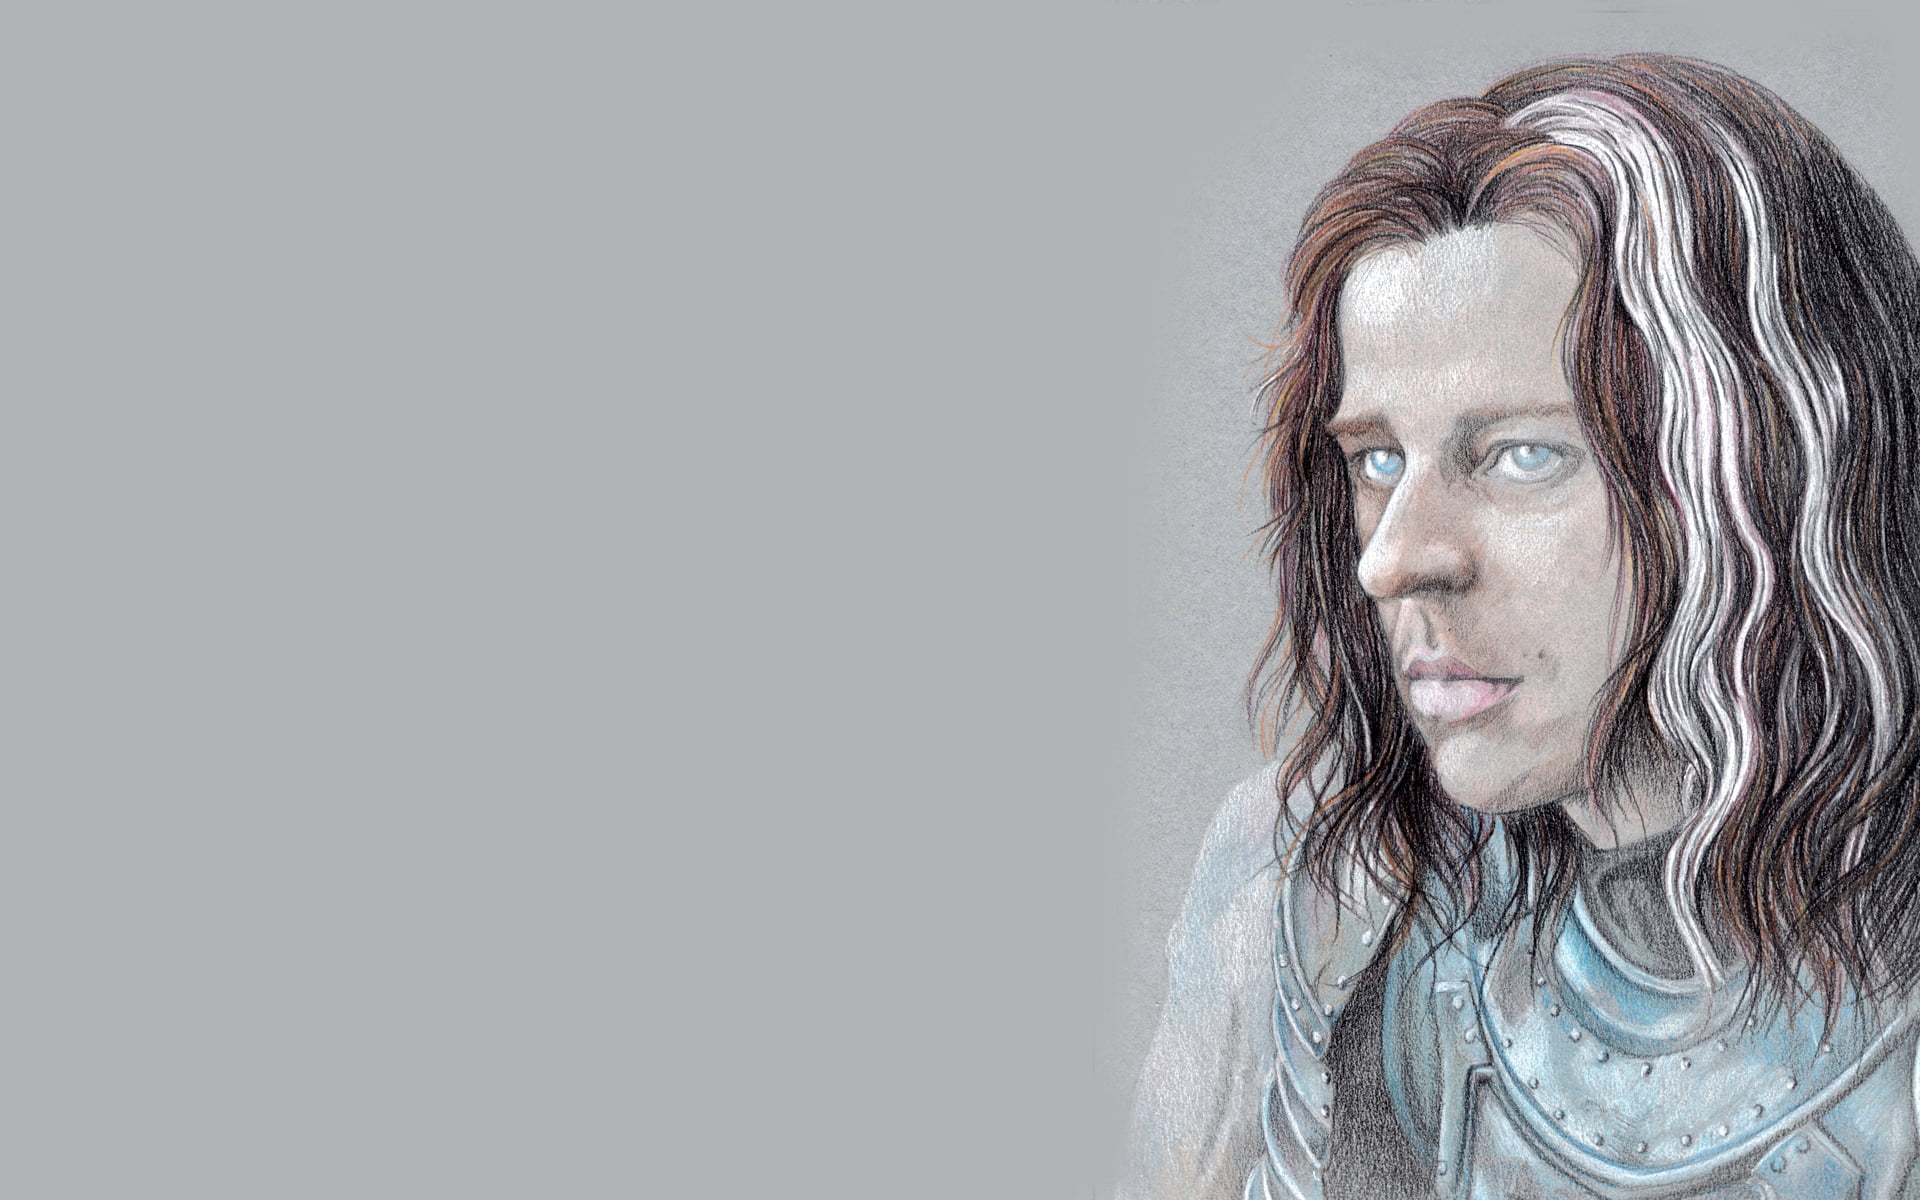 man in blue top painting, Game of Thrones, Jaqen H'ghar, artwork